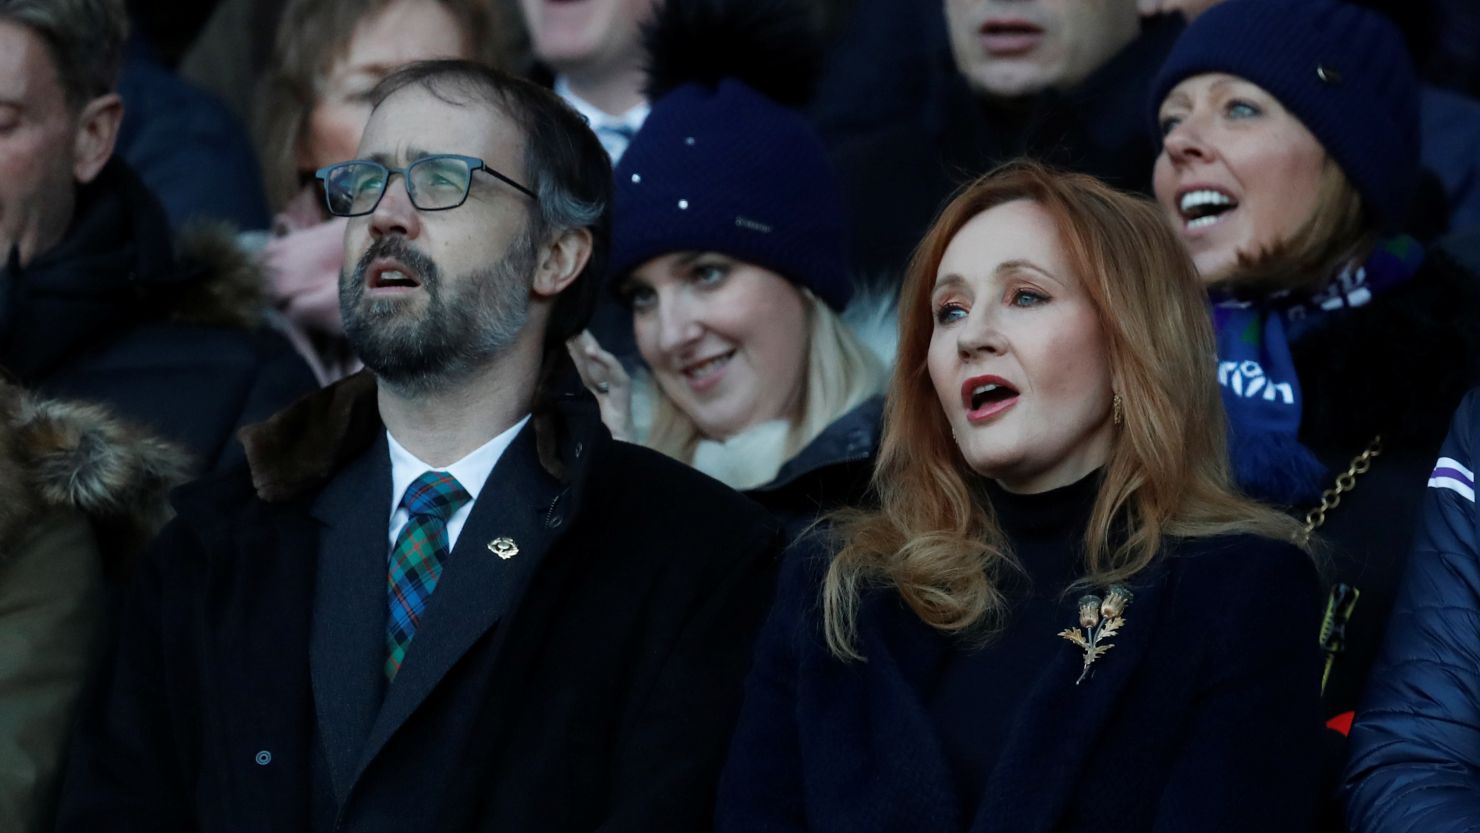  Author JK Rowling (right) said she received a threatening tweet.